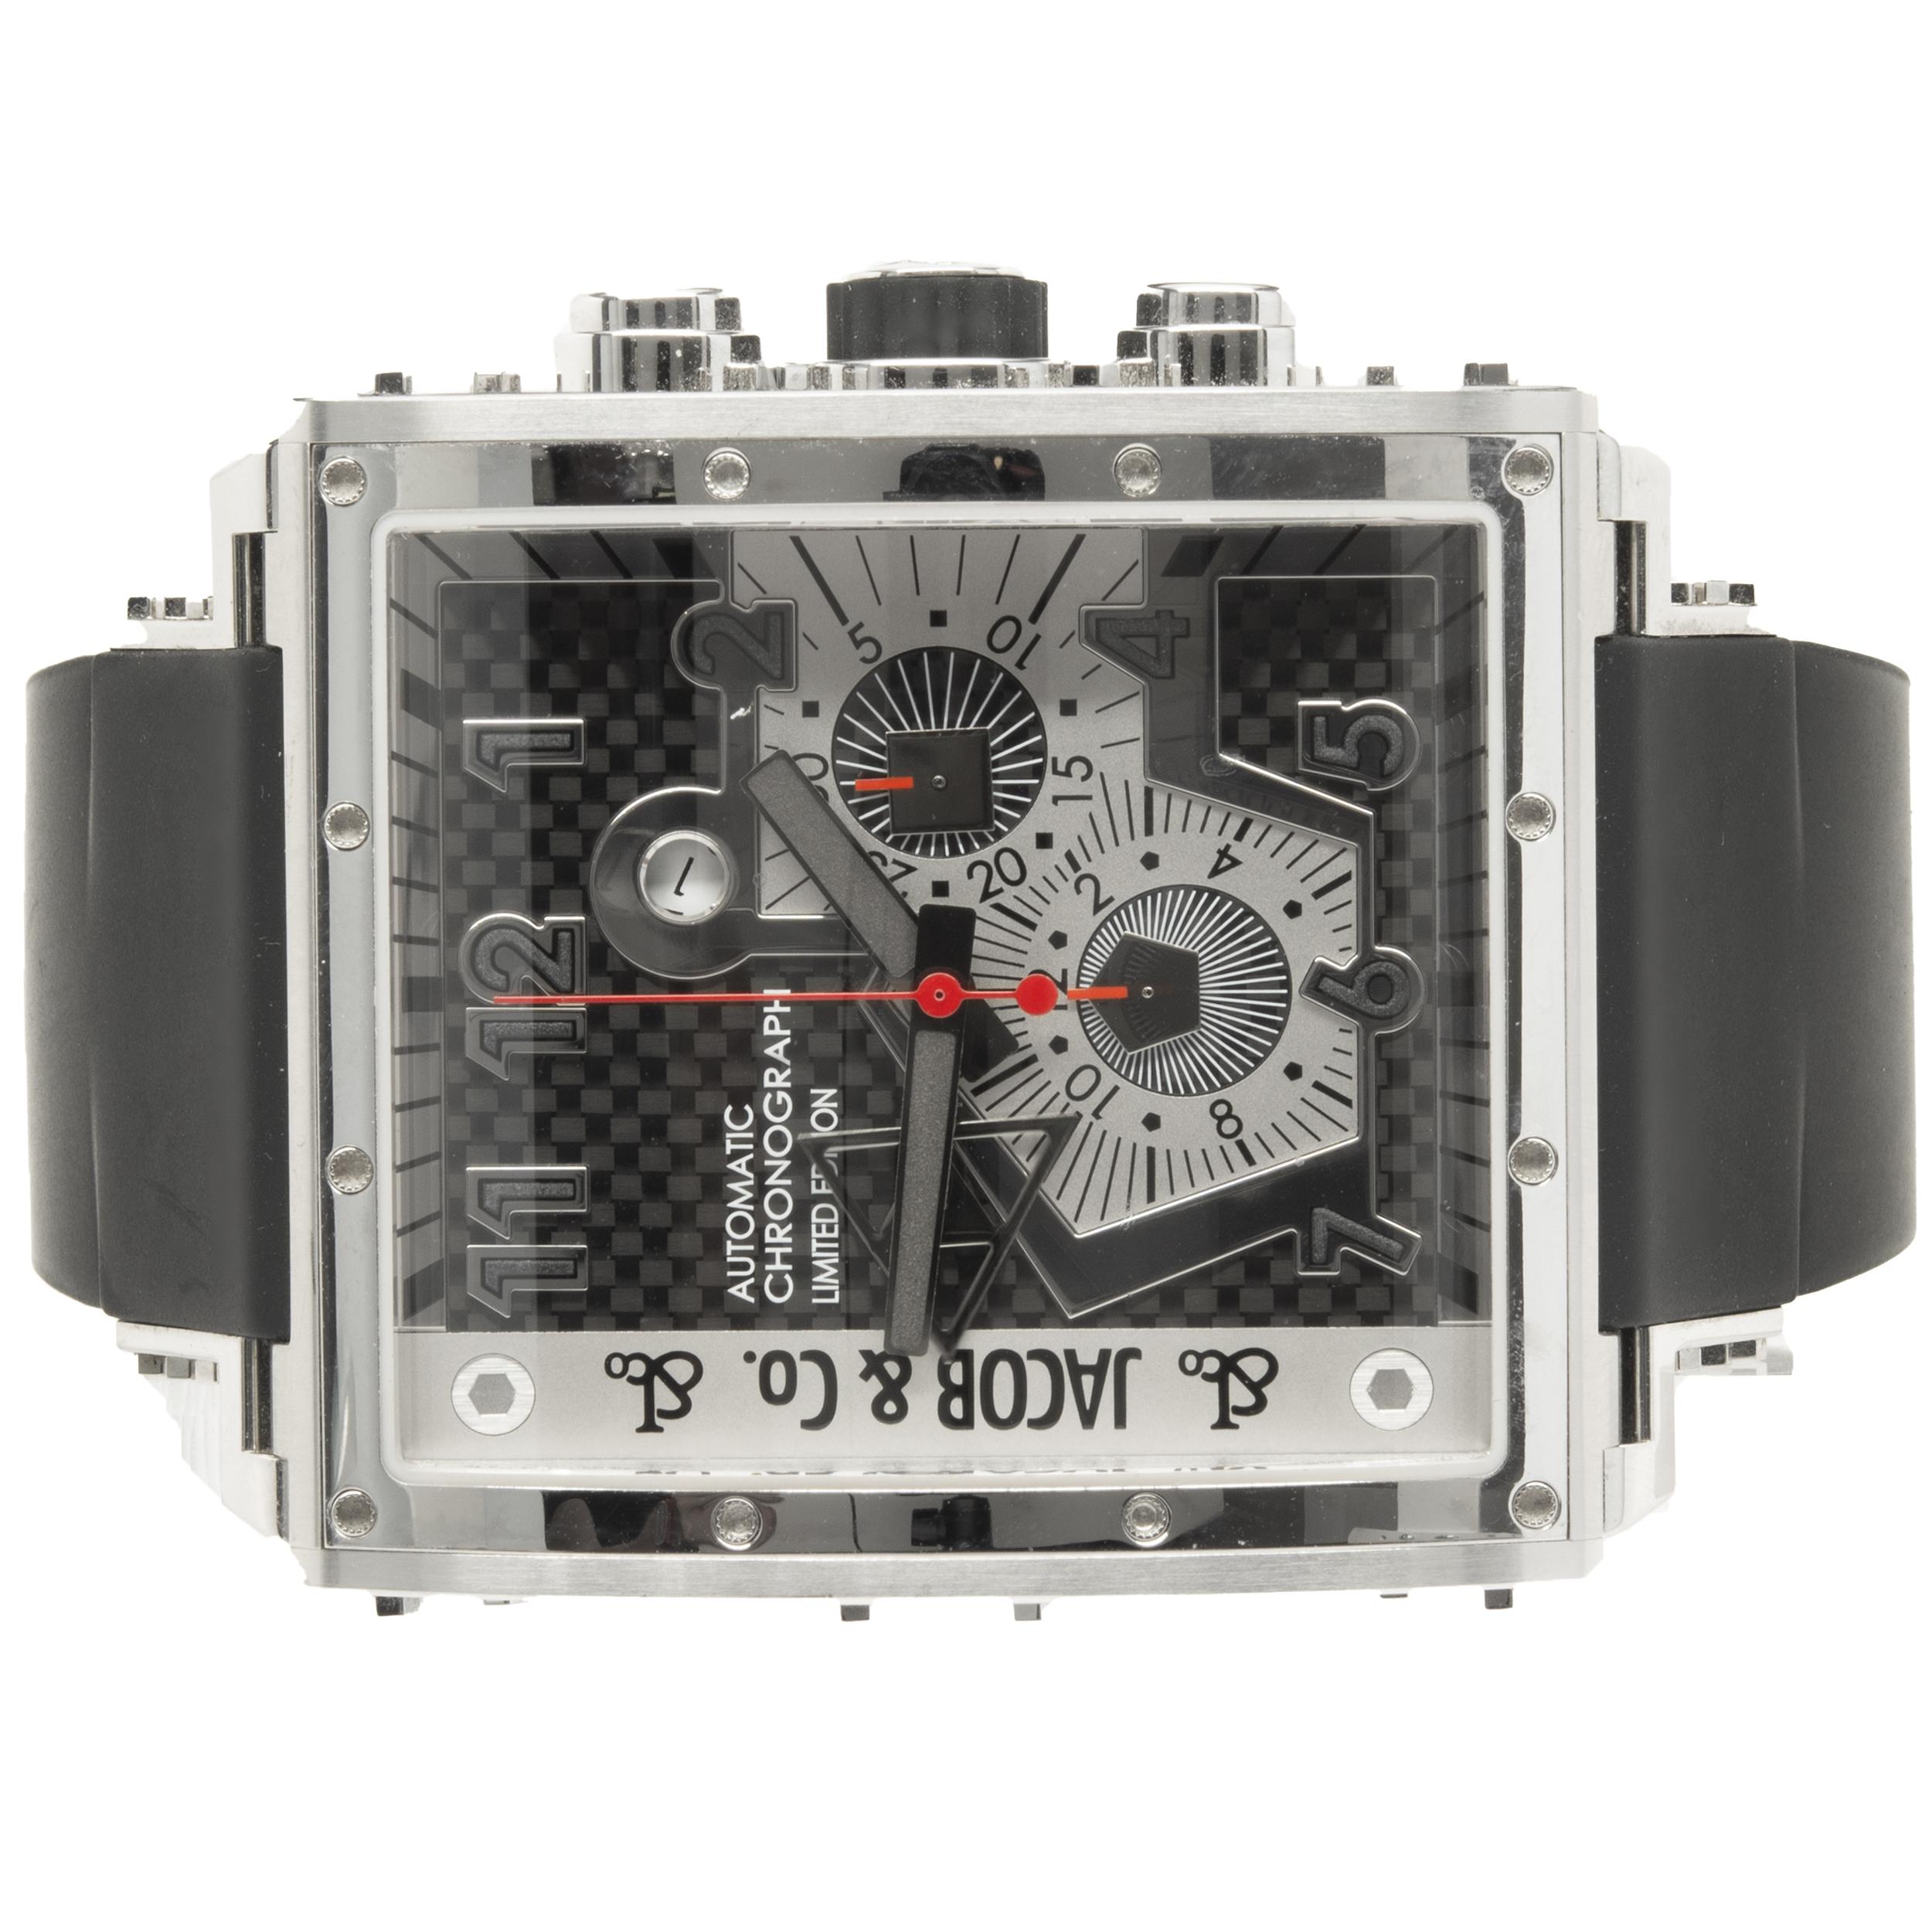 Movement: quartz
Function: hours, minutes, seconds, date, chronograph
Case: stainless steel square 51.2 x 46.5mm case, pull/push crowns, sapphire protective crystal
Band: black rubber strap, integrated clasp
Dial: black carbon chronograph
Reference